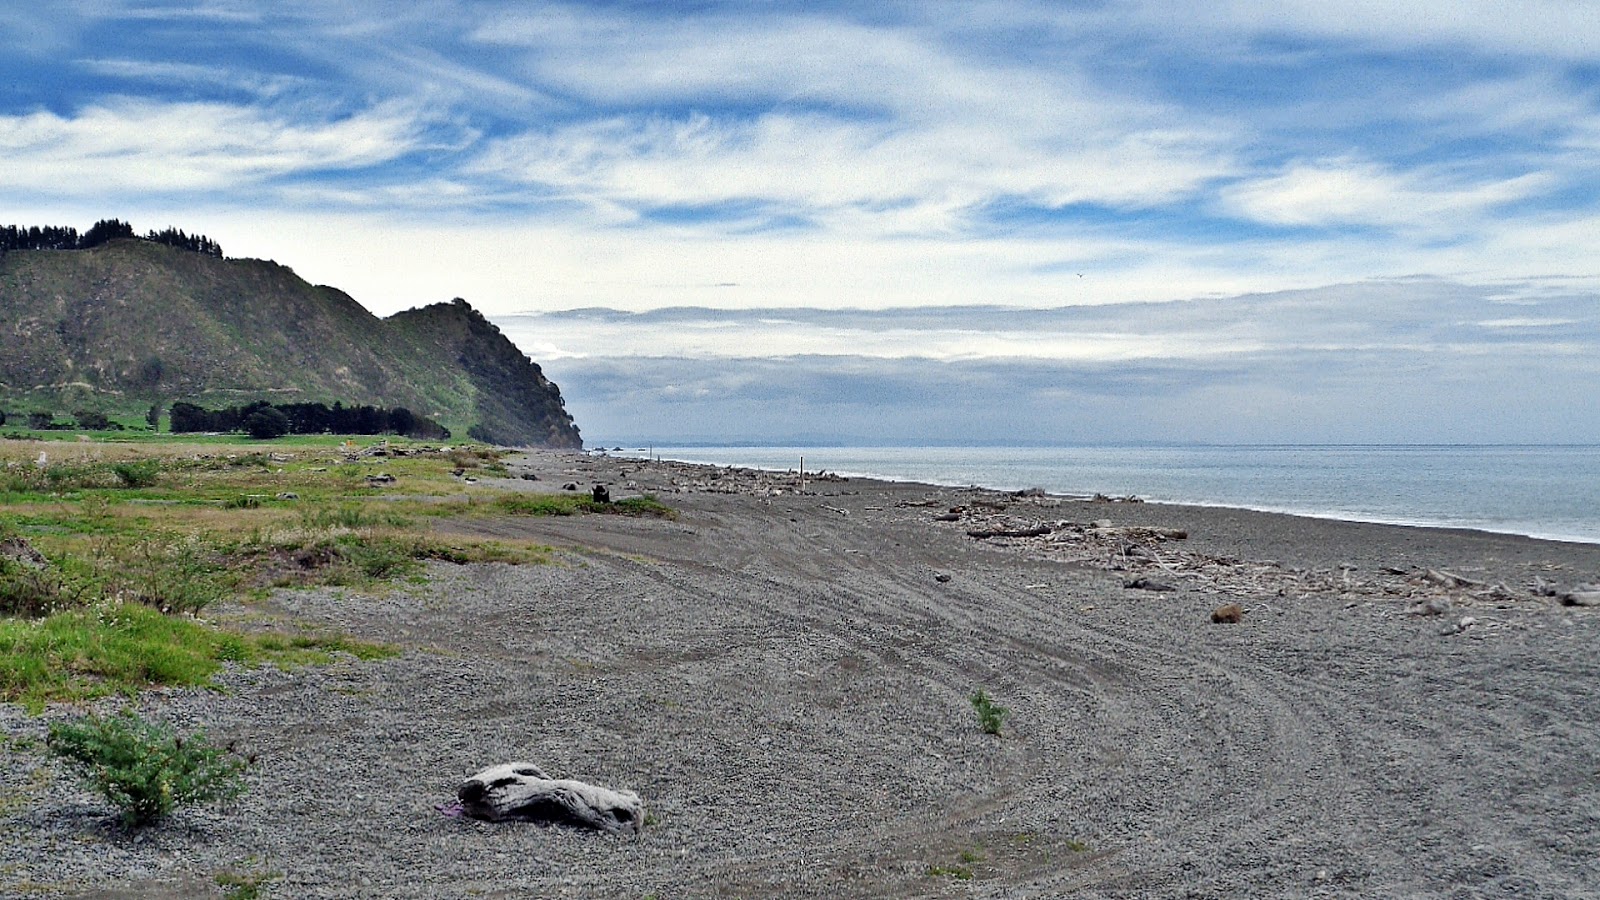 Photo of Torere Beach with gray pebble surface